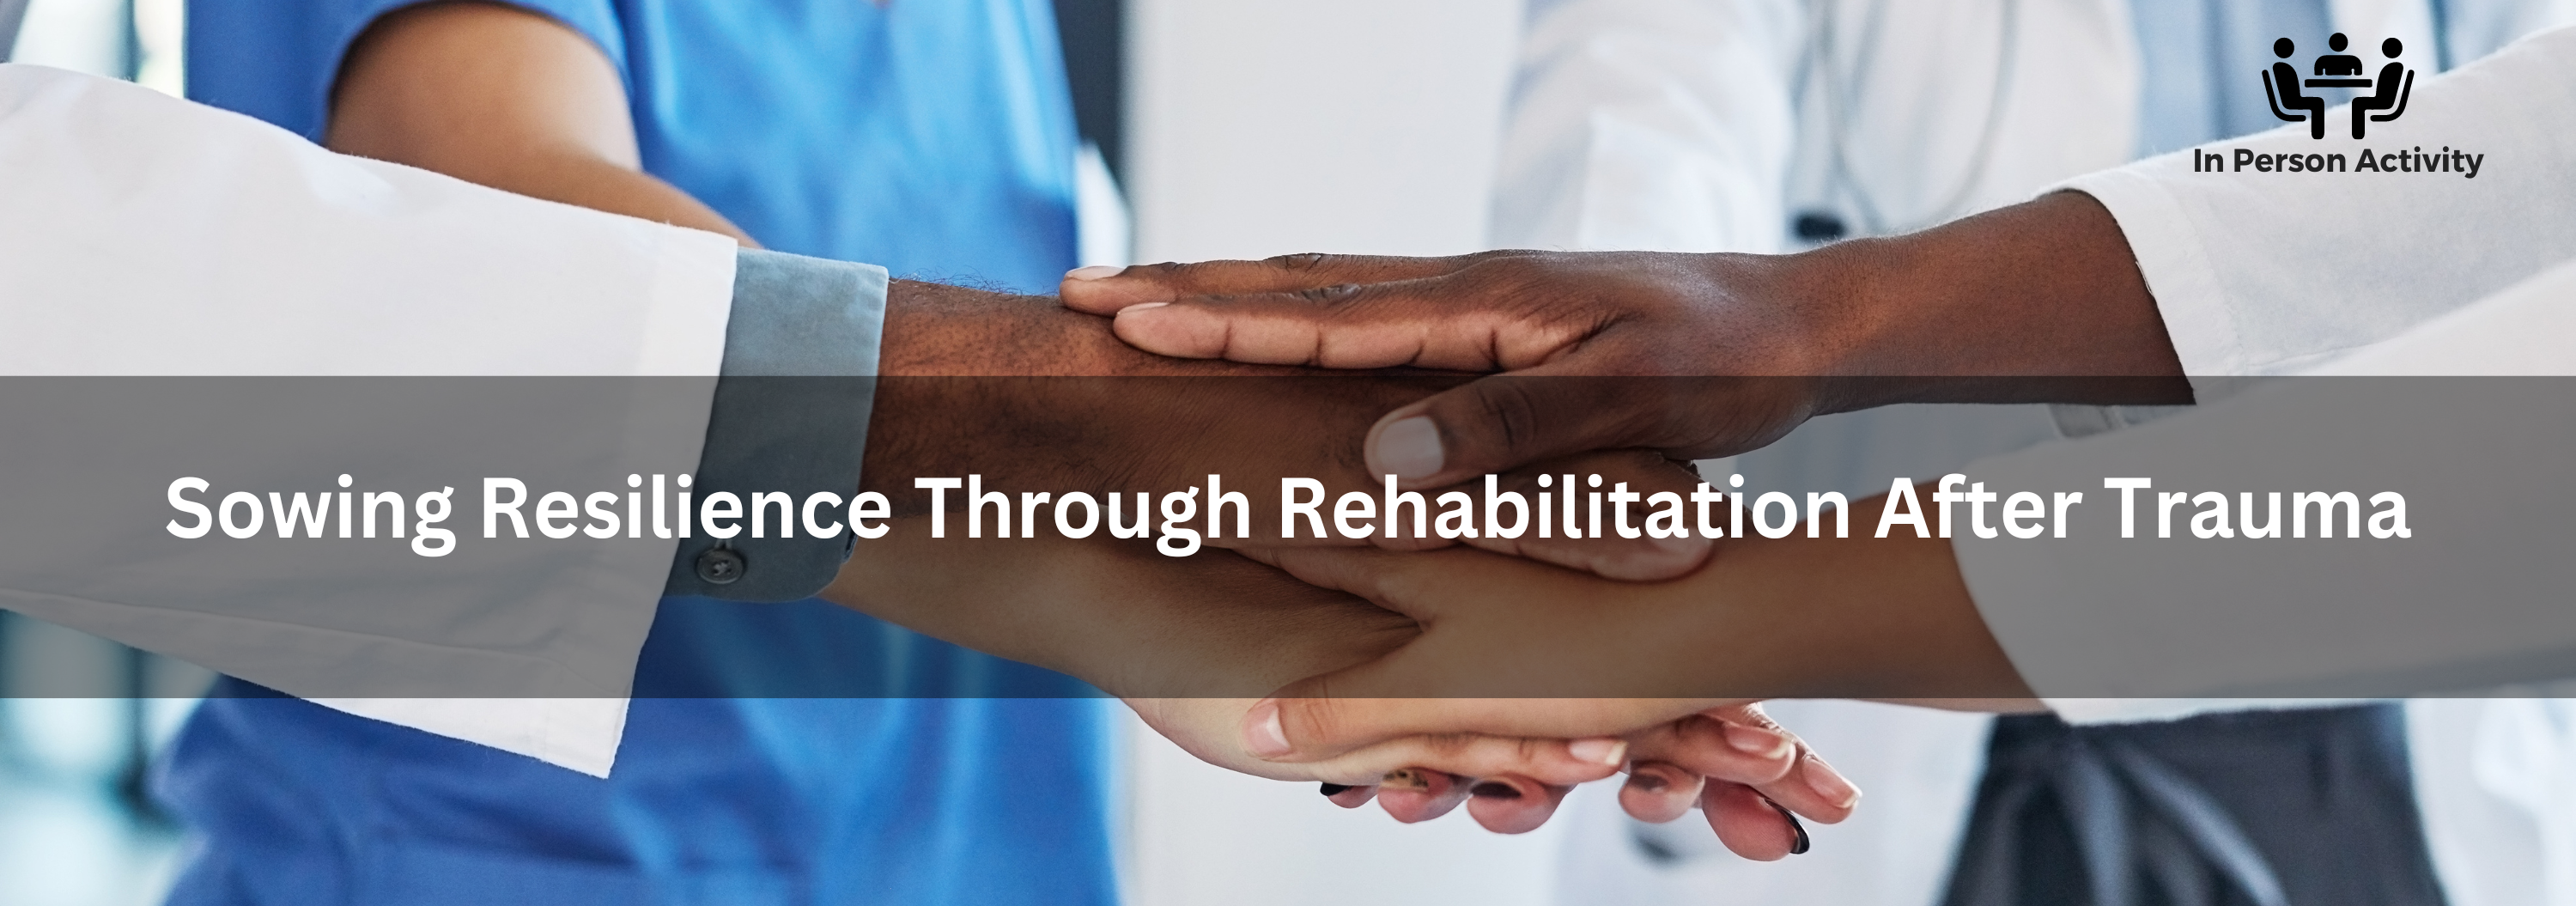 Sowing Resilience Through Rehabilitation After Trauma Banner